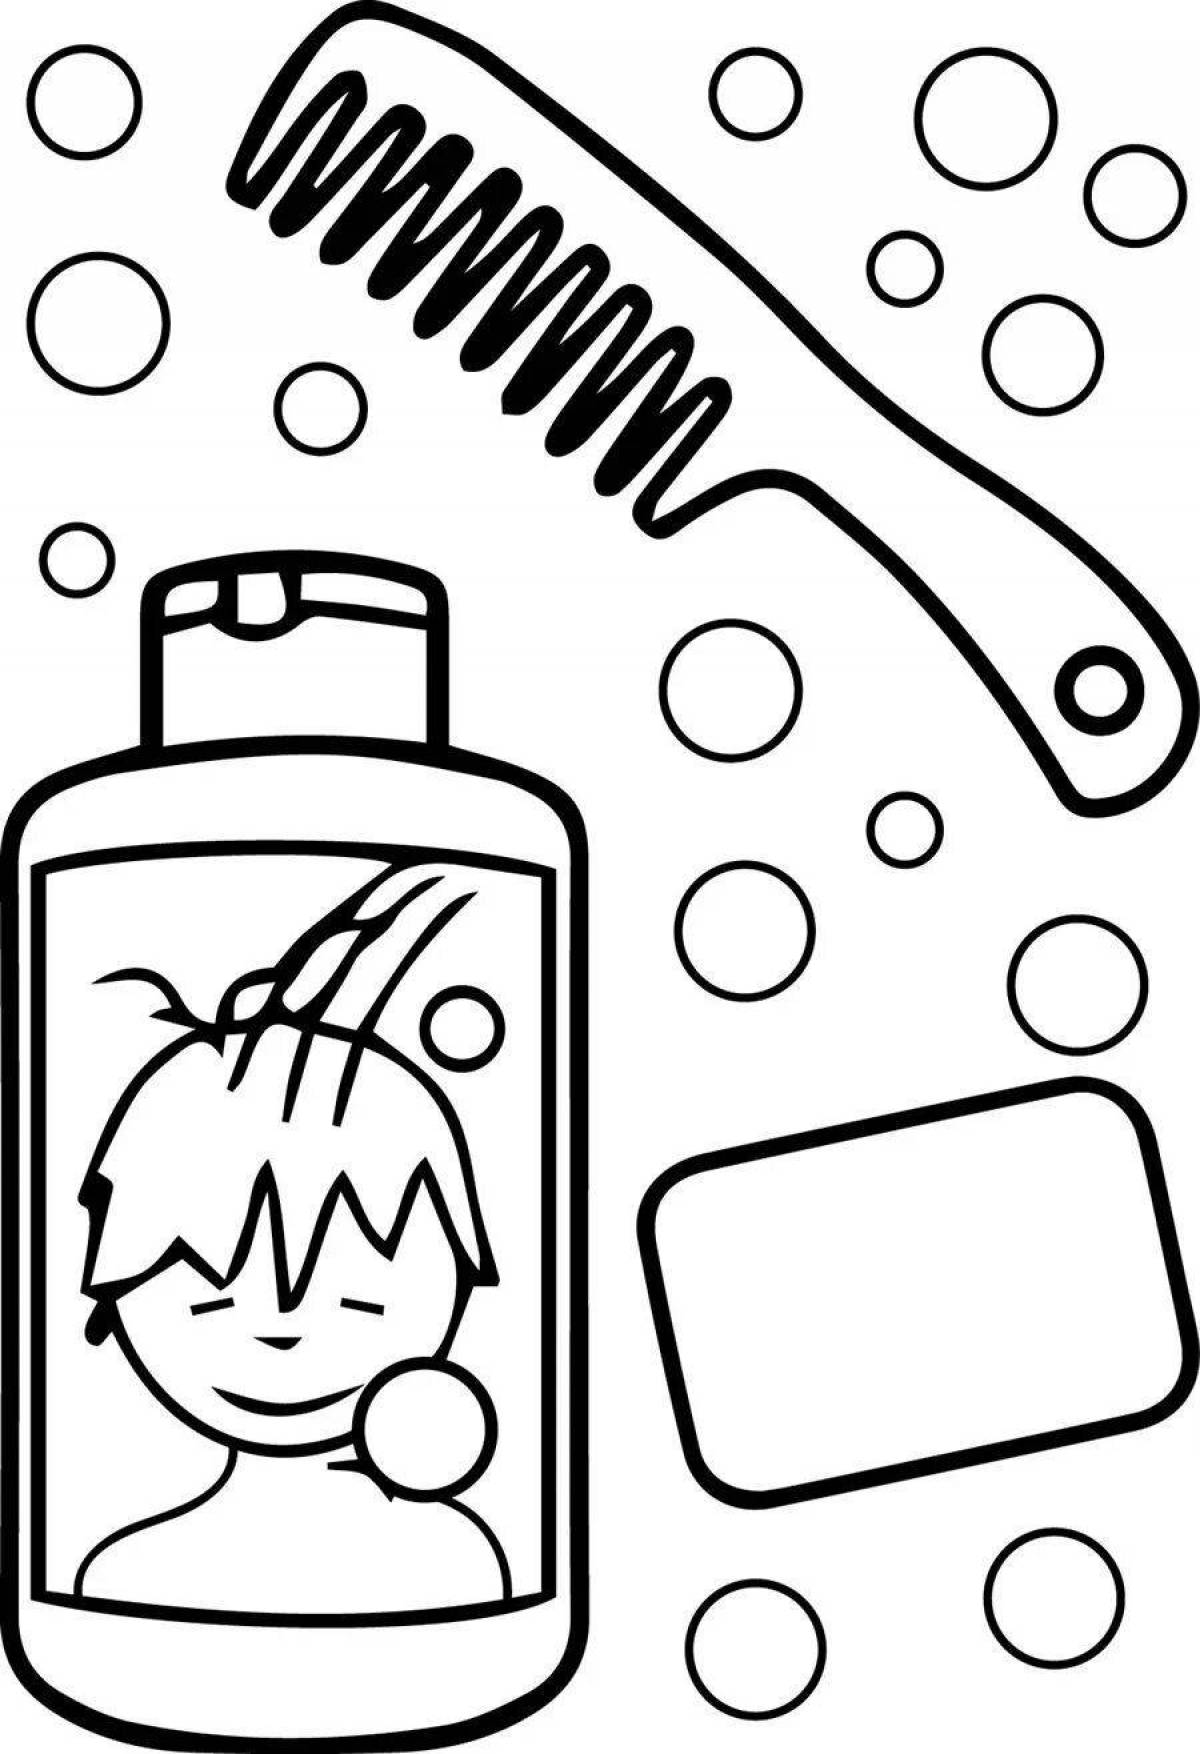 Colorful hygiene coloring book for babies